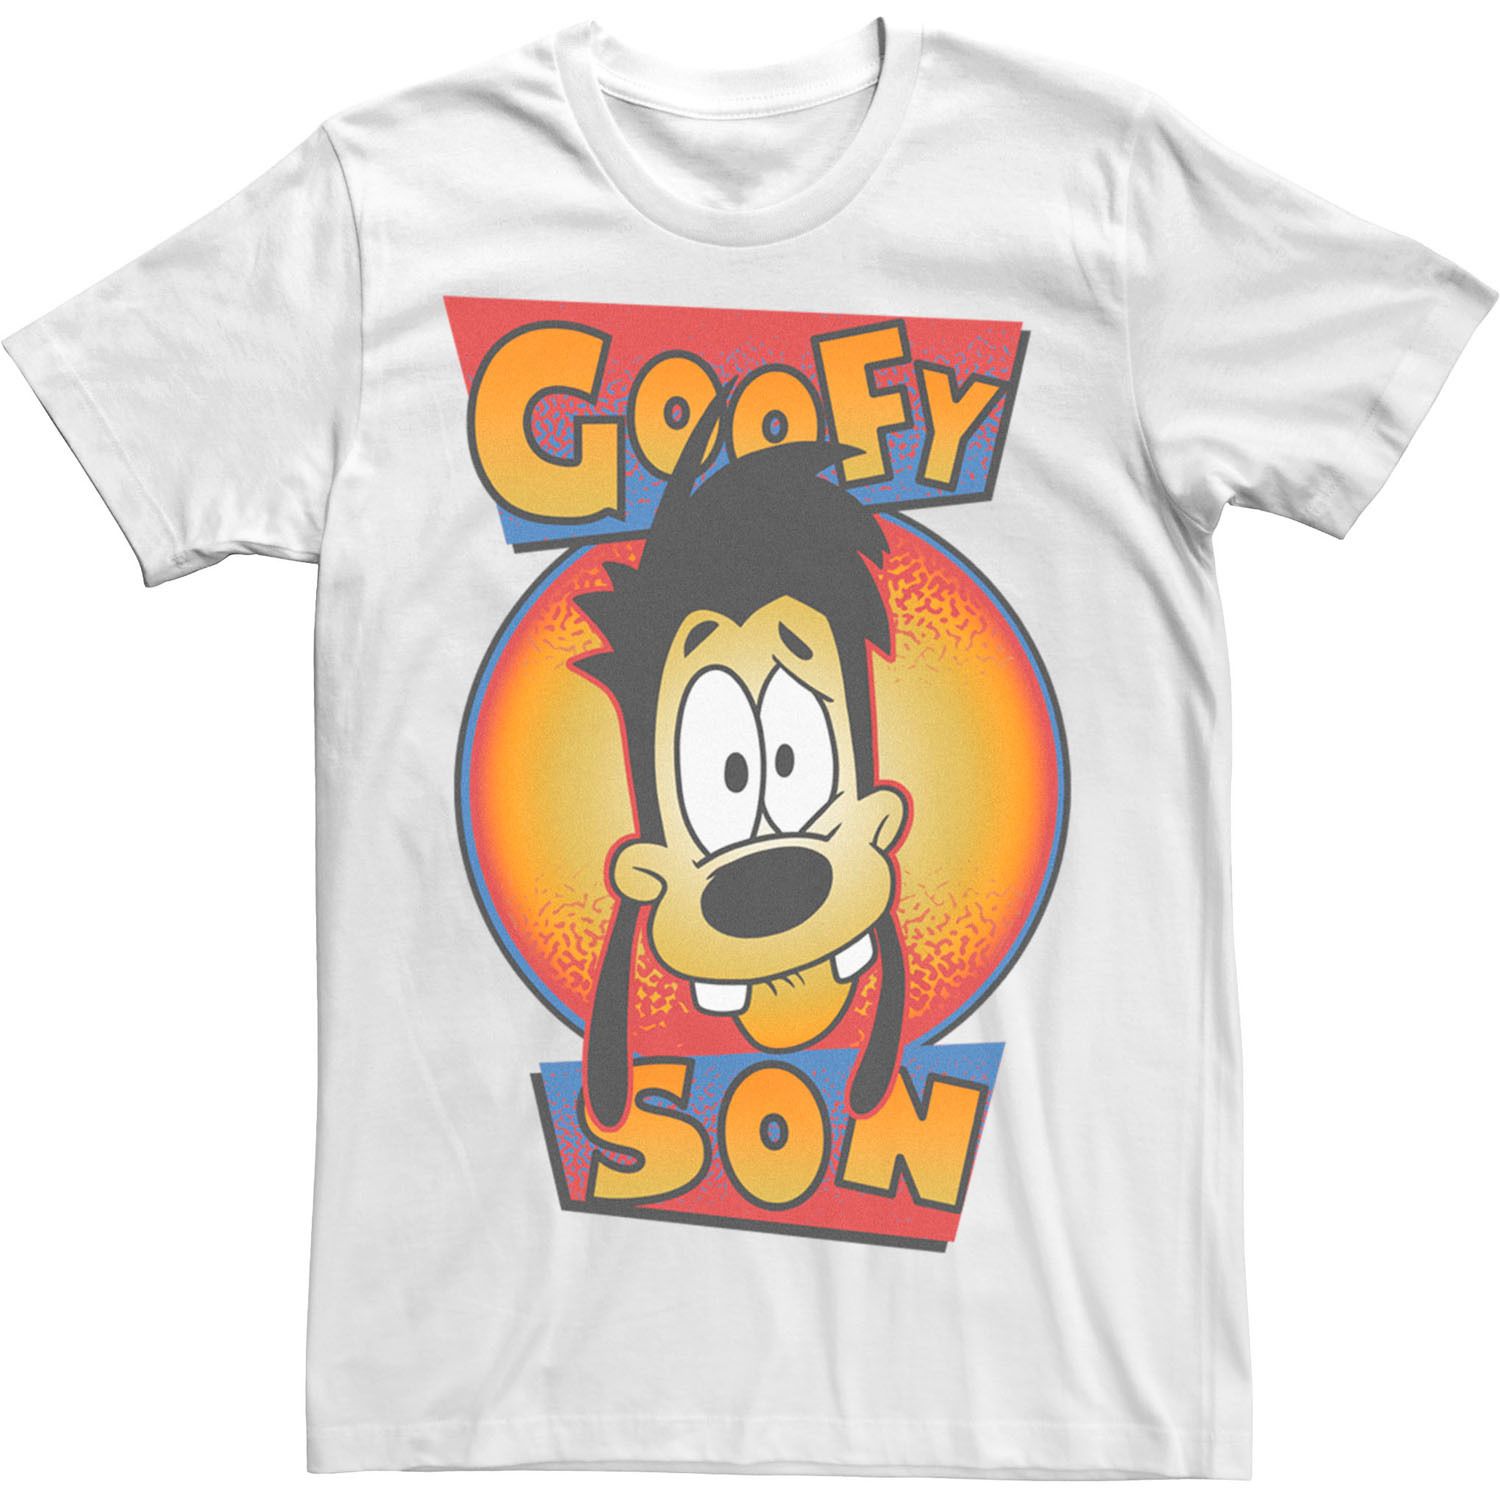 Image for Licensed Character Men's Disney A Goofy Movie Max Goofy Son Tee at Kohl's.